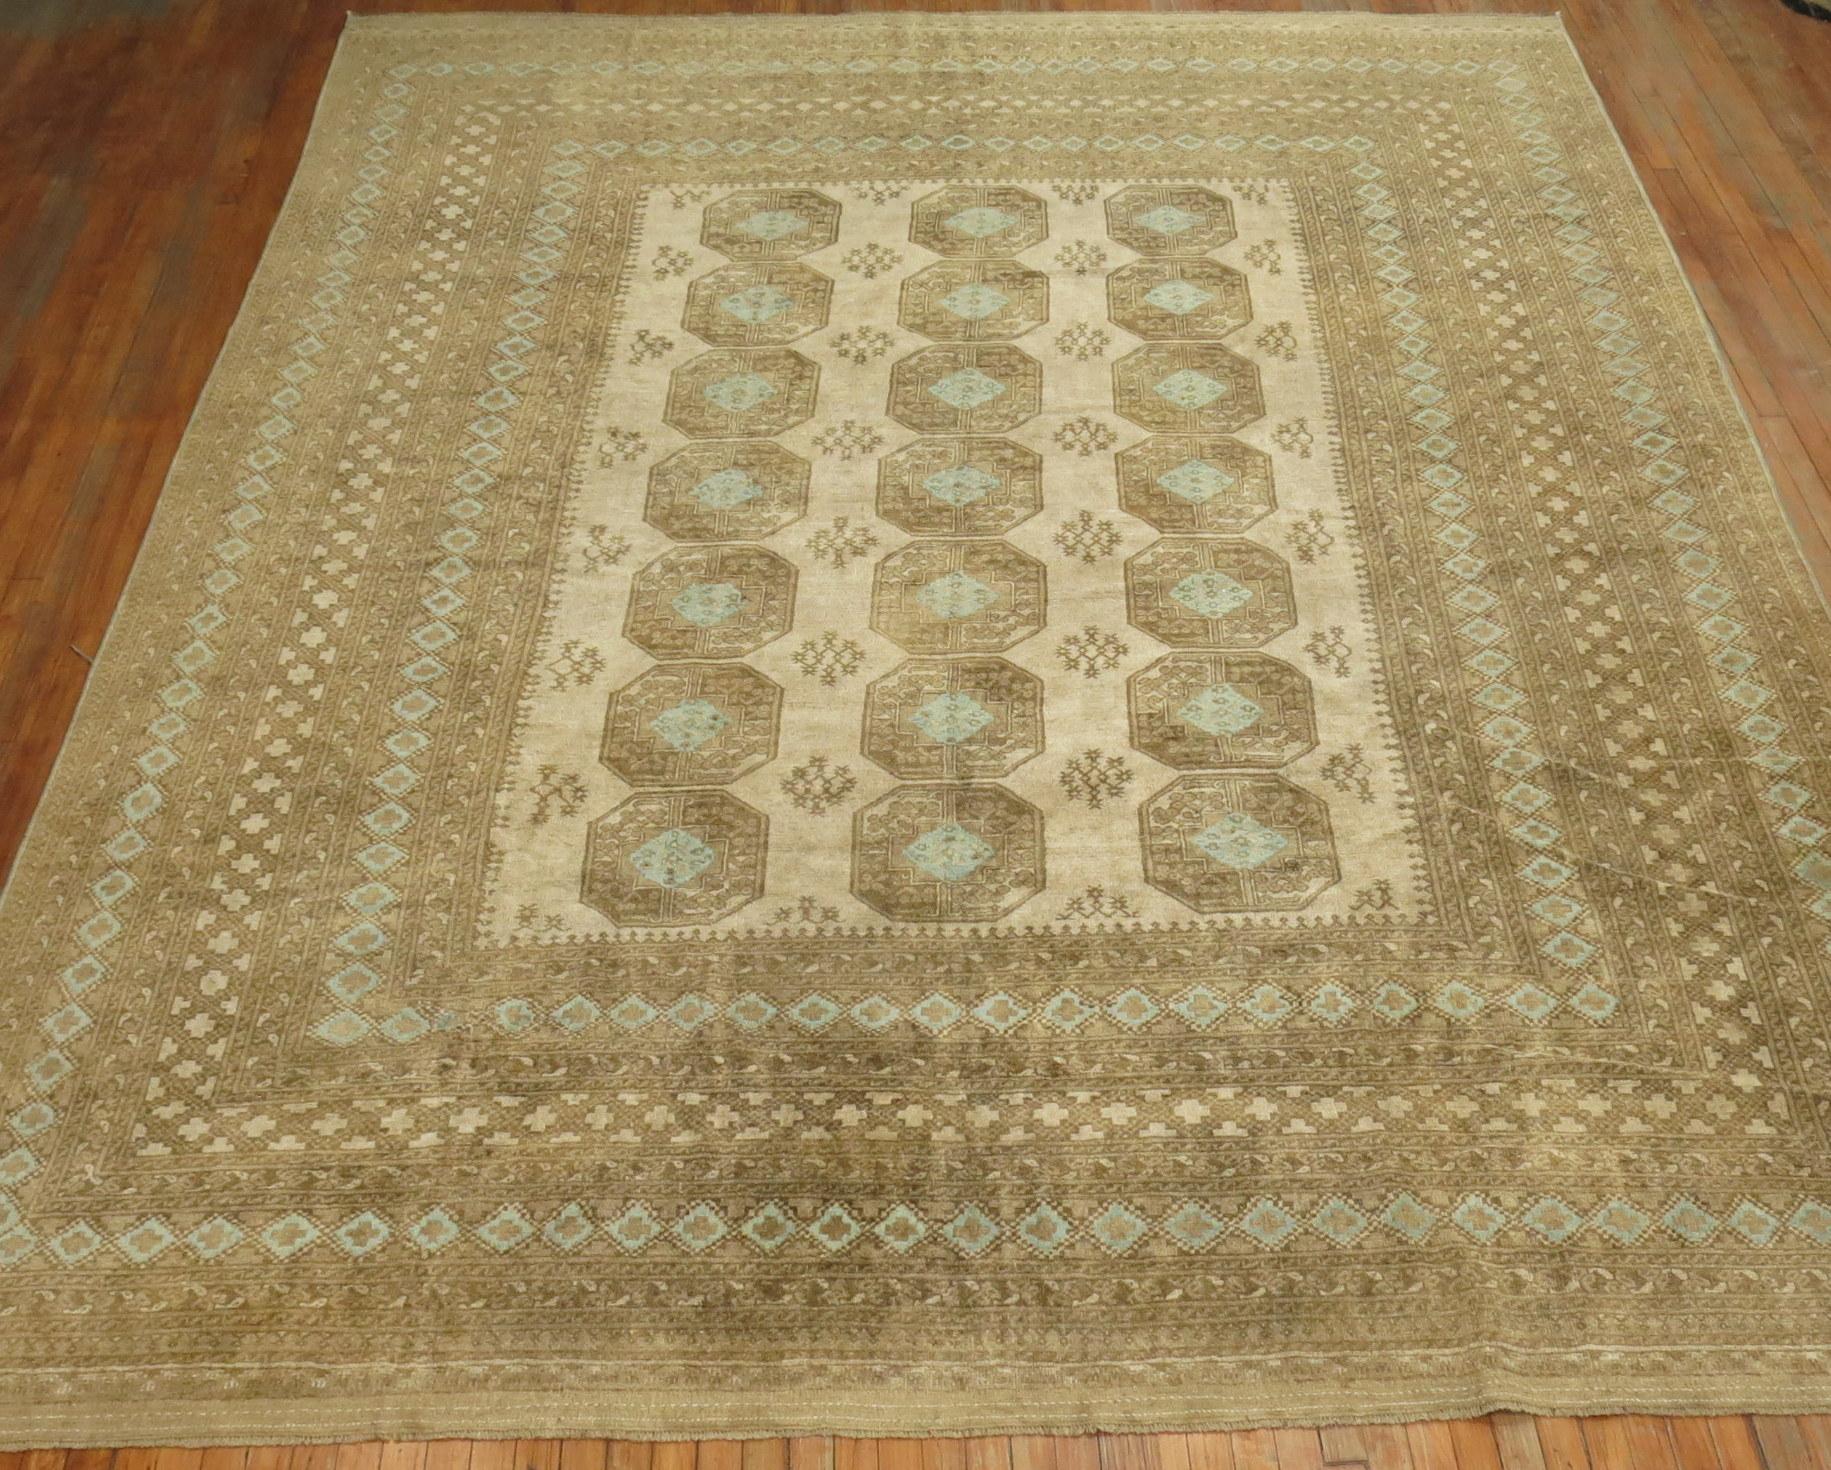 A mid-20th century room size Ersari rug with multiple borders in beige and light brown. The field has a tribal nomadic field highlighted by light blue cotton accents.

Size: 10'5